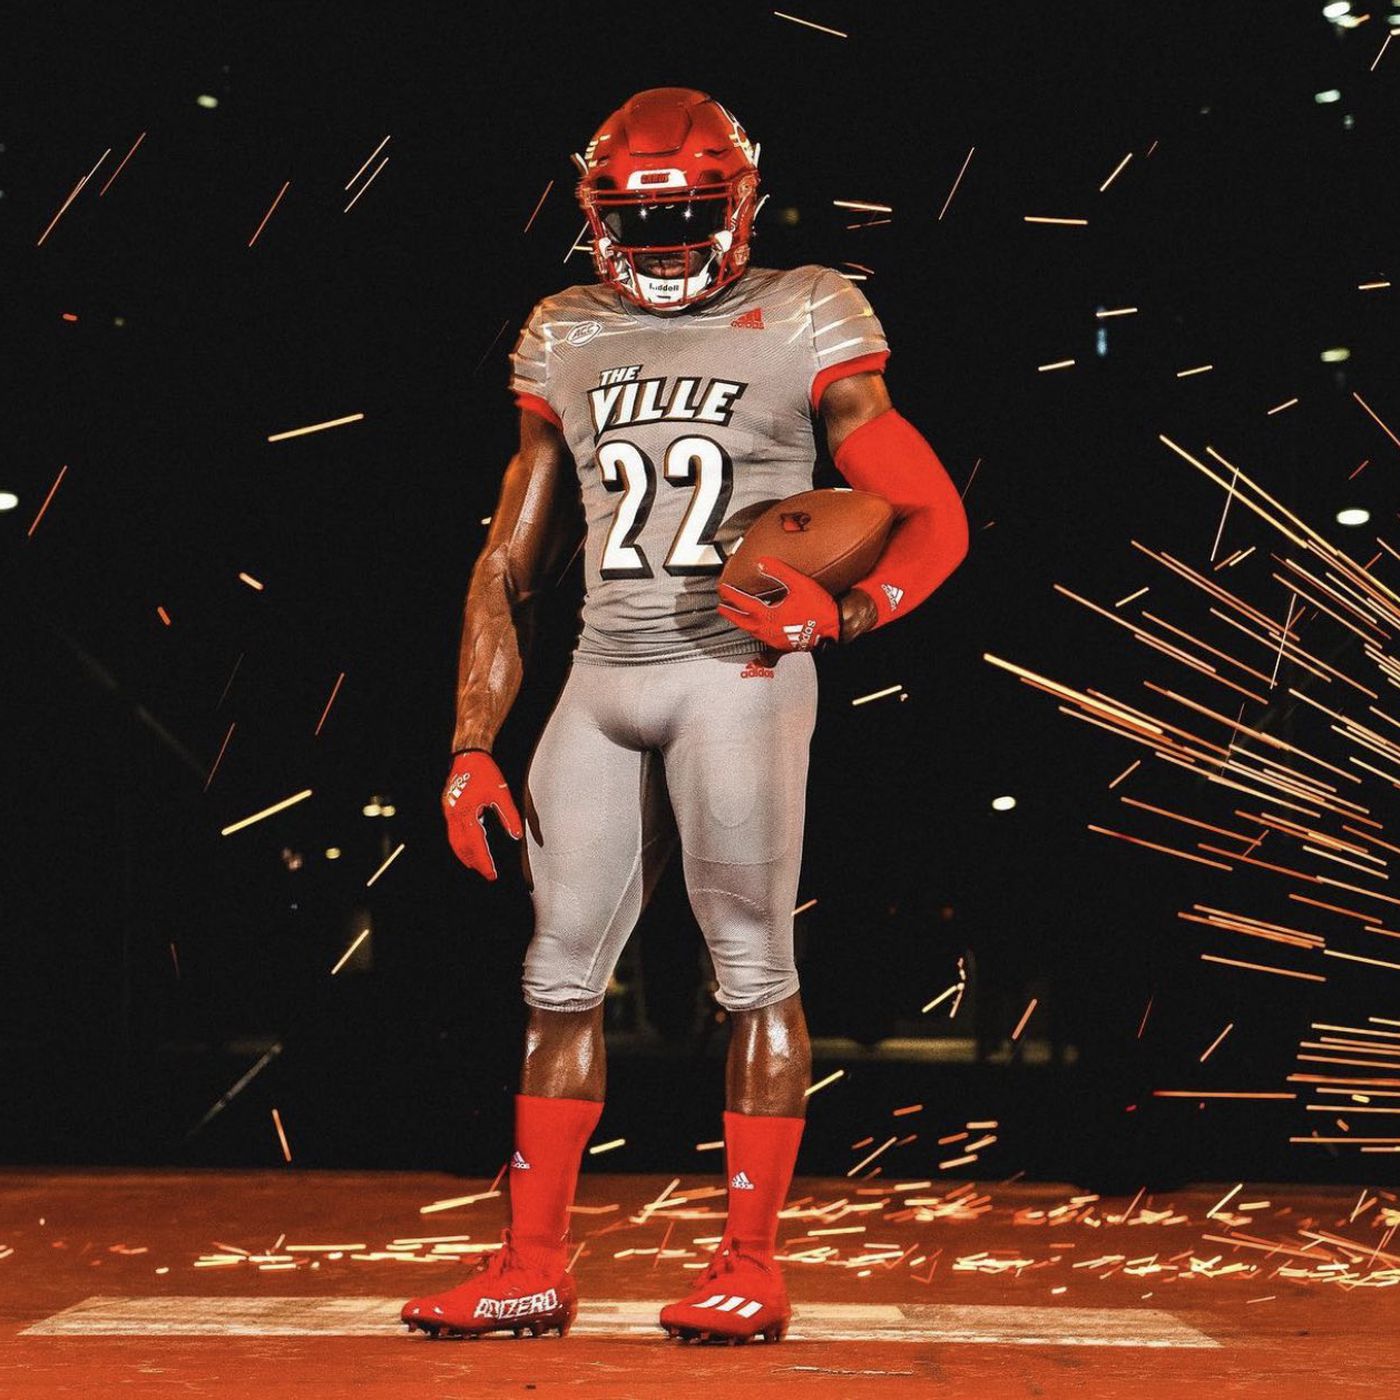 adidas Louisville Football Home Jersey - Red